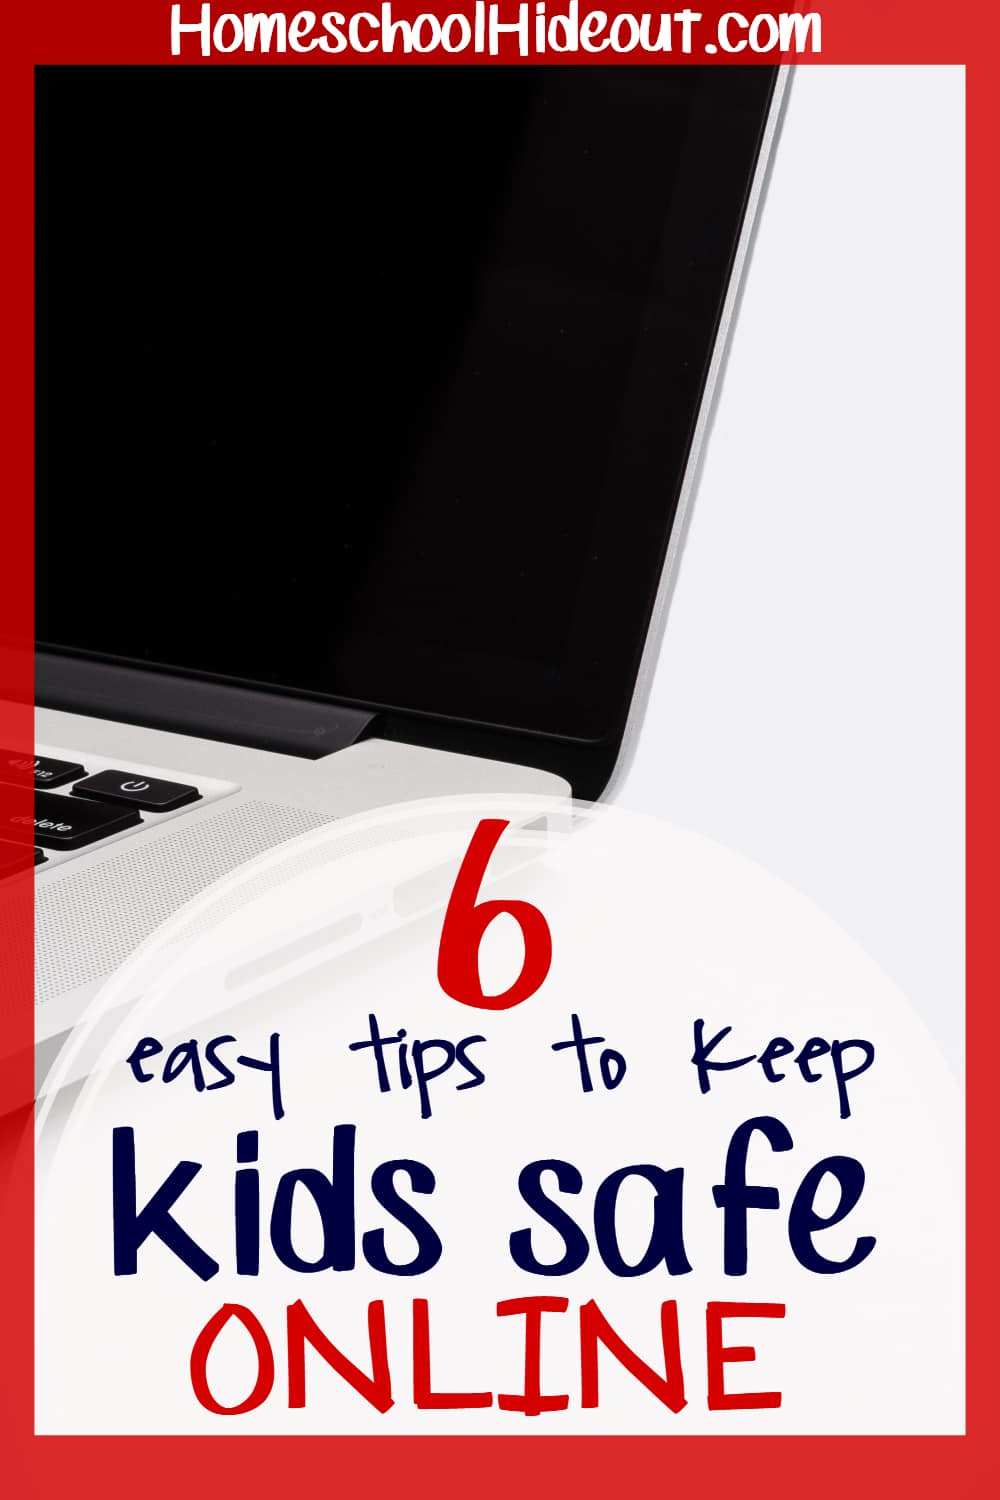 These 6 tips will help you keep kids safe from online dangers. Paired with some common sense, your kiddos will be much more safe after you've taken these easy actions.